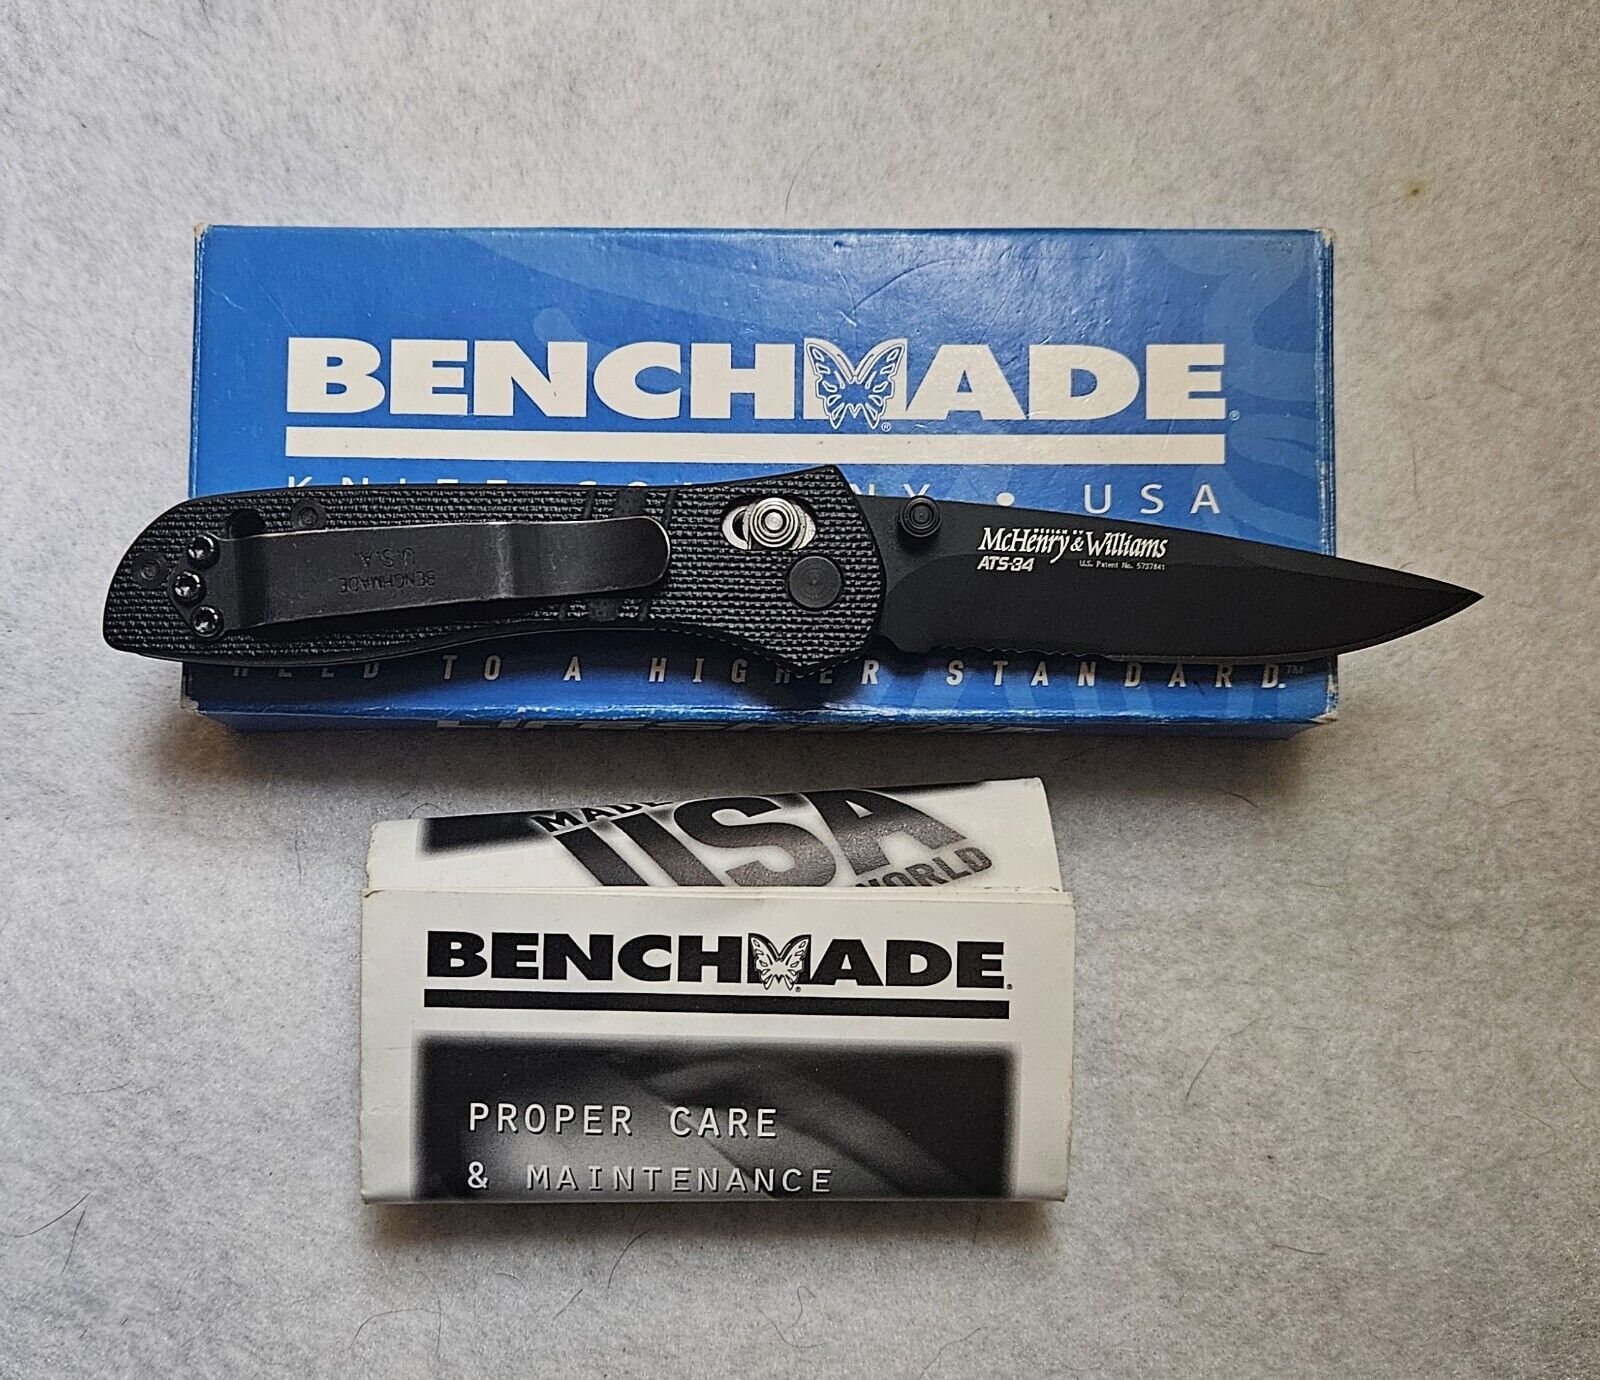 Benchmade Vintage McHenry & Williams 705SBT - ATS 34 New In Box w/ Papers